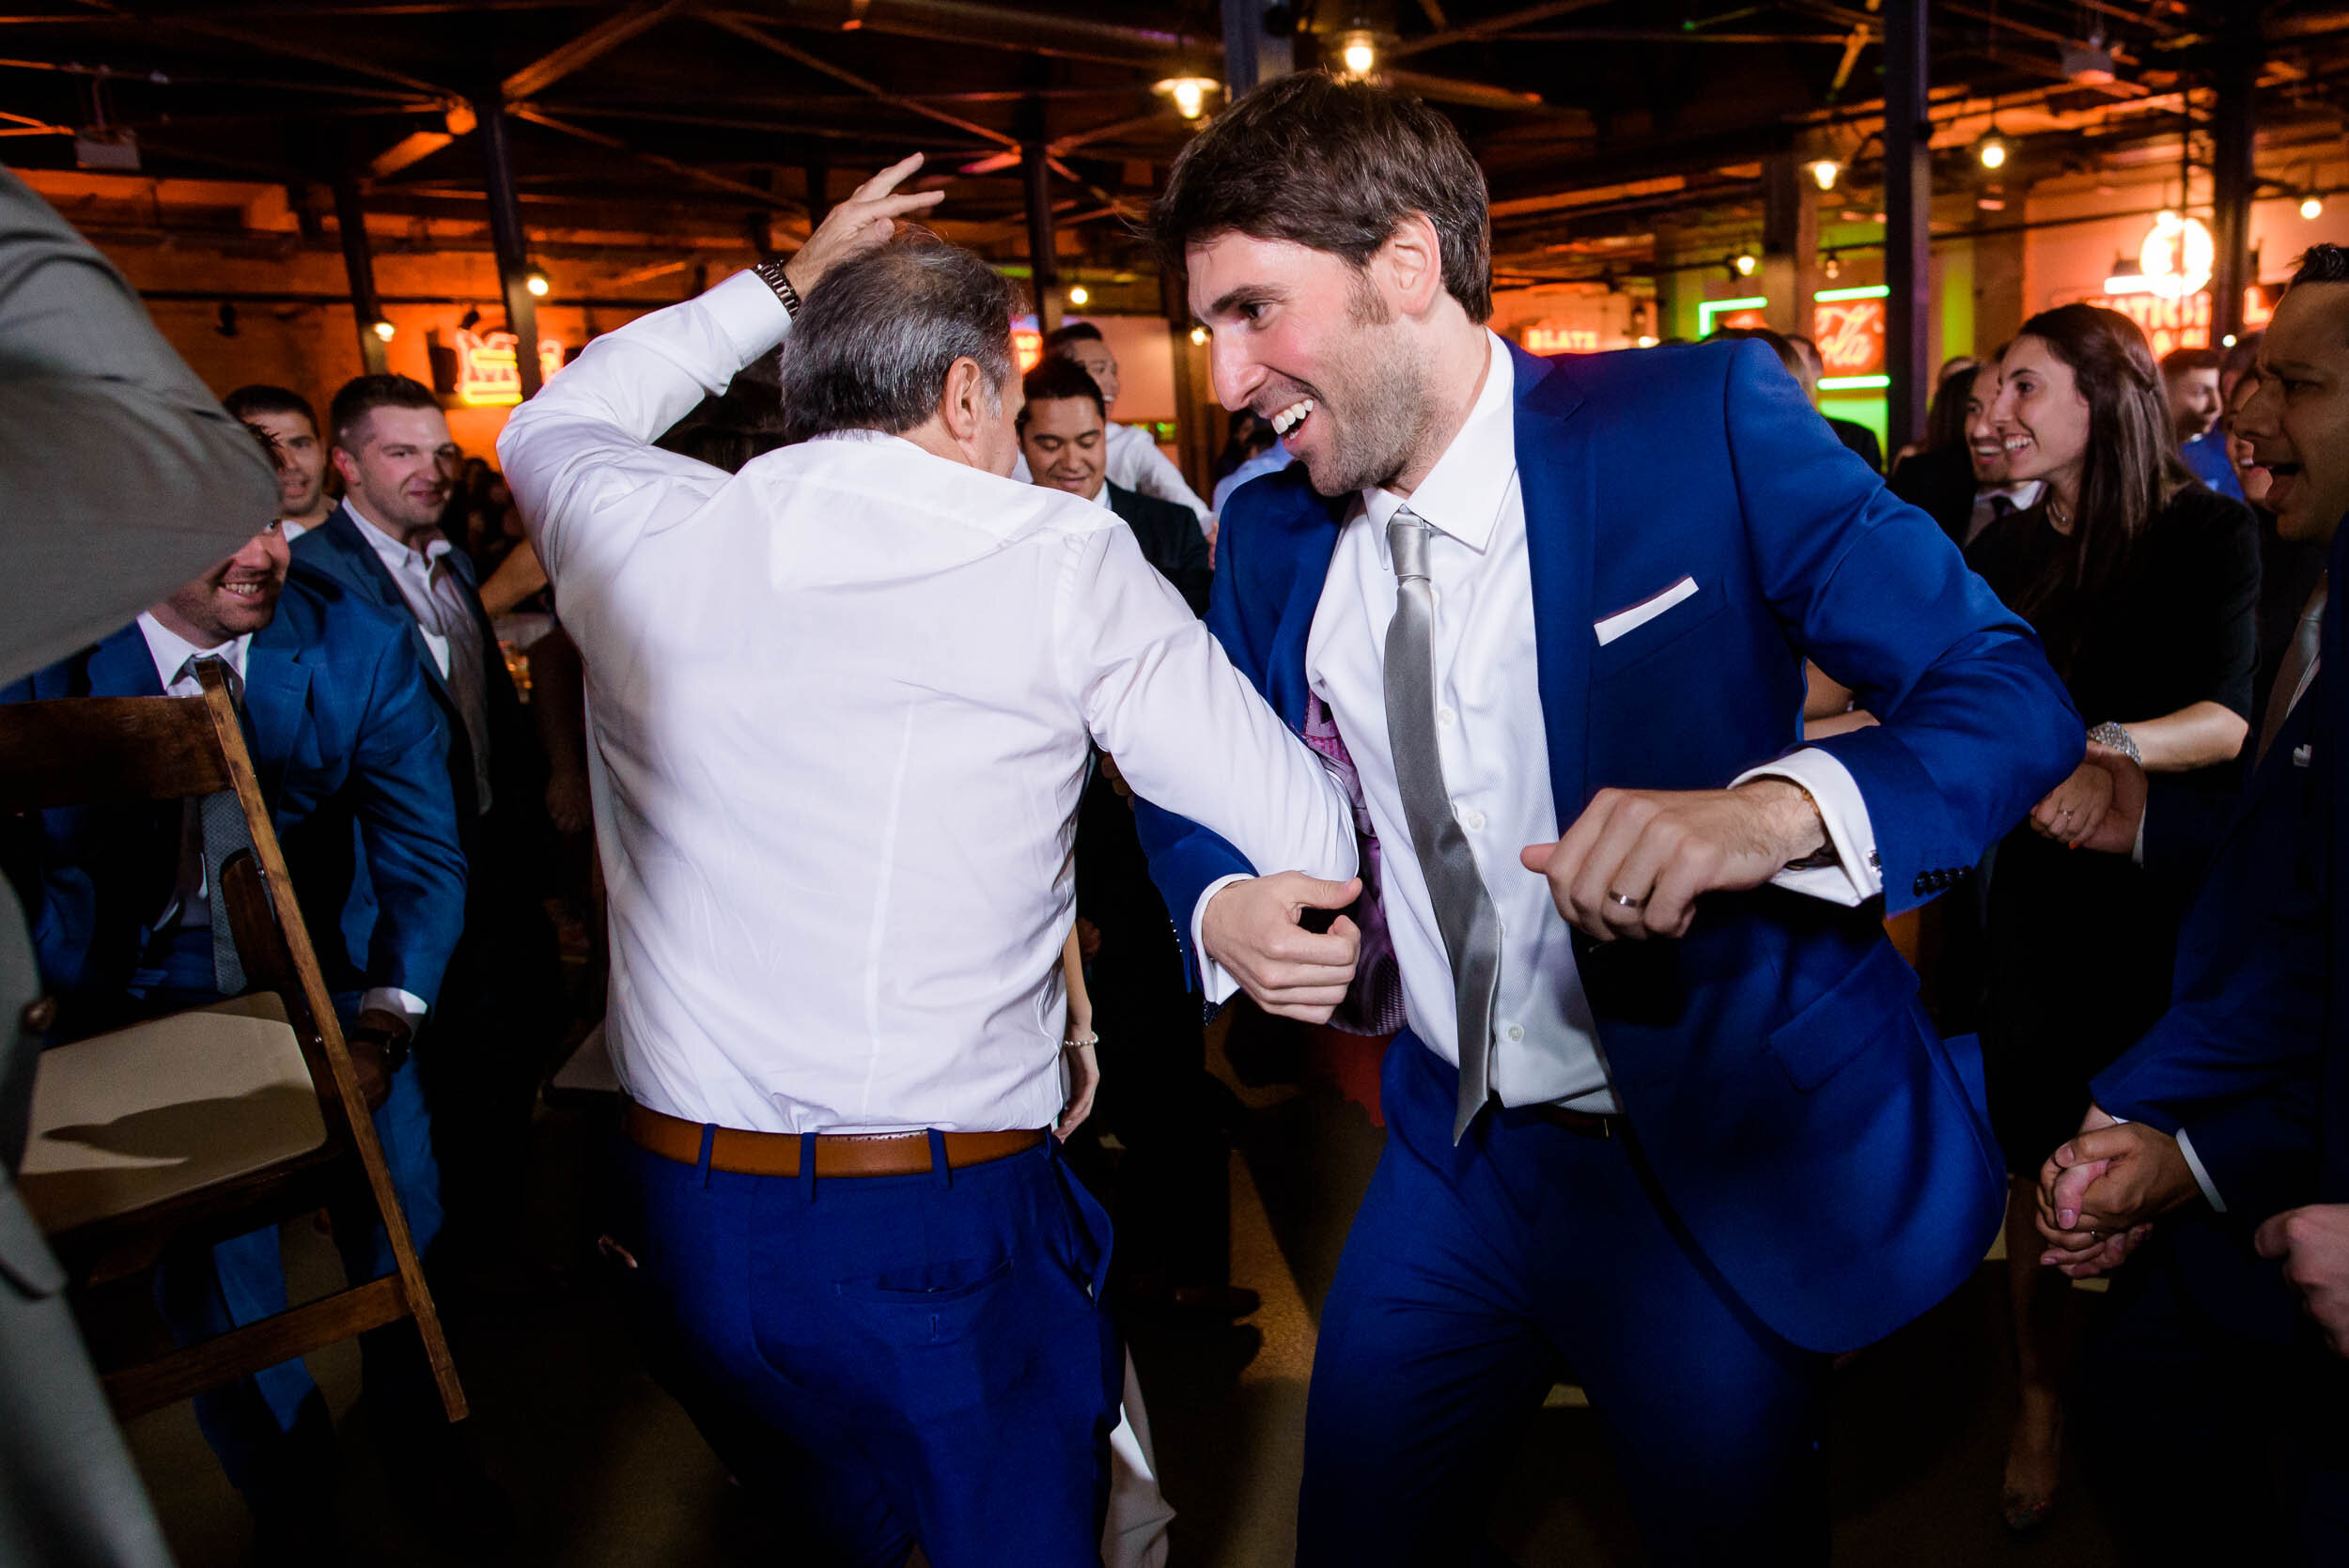 Groom dances during the horah: Ravenswood Event Center Chicago wedding captured by J. Brown Photography.  